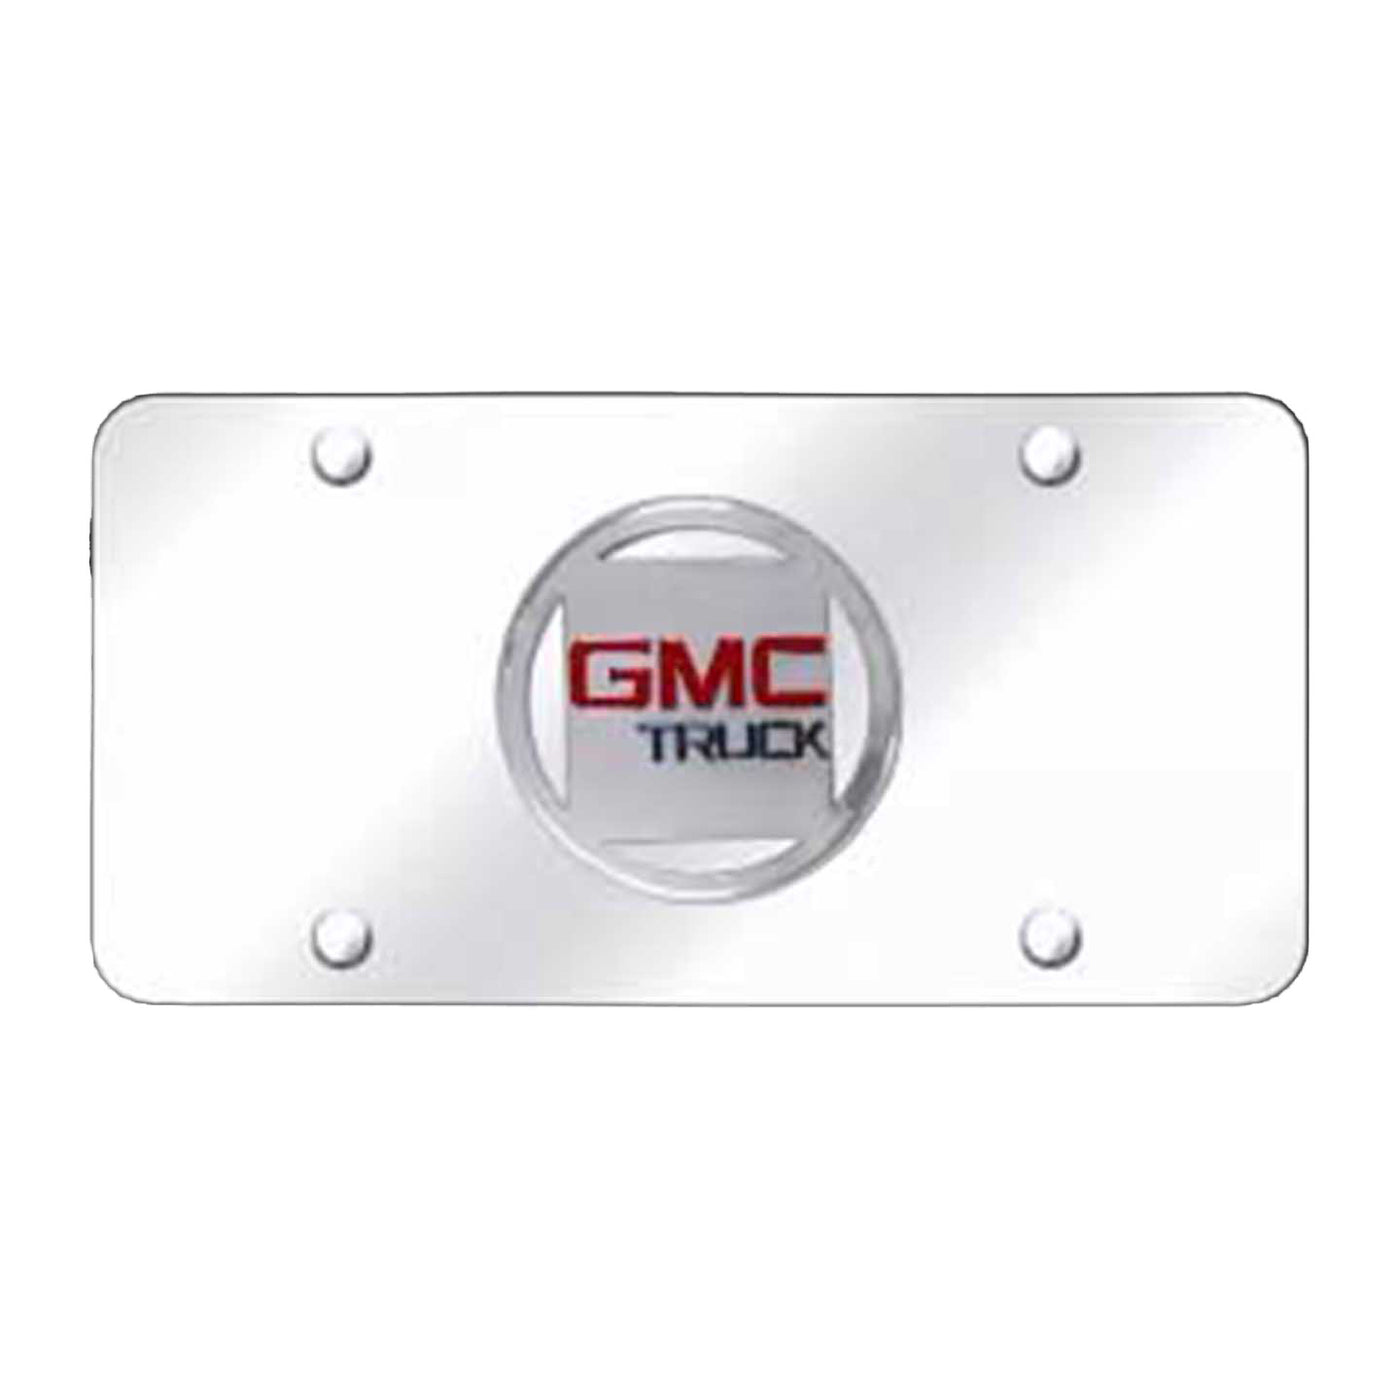 GMC License Plate - Chrome on Mirrored